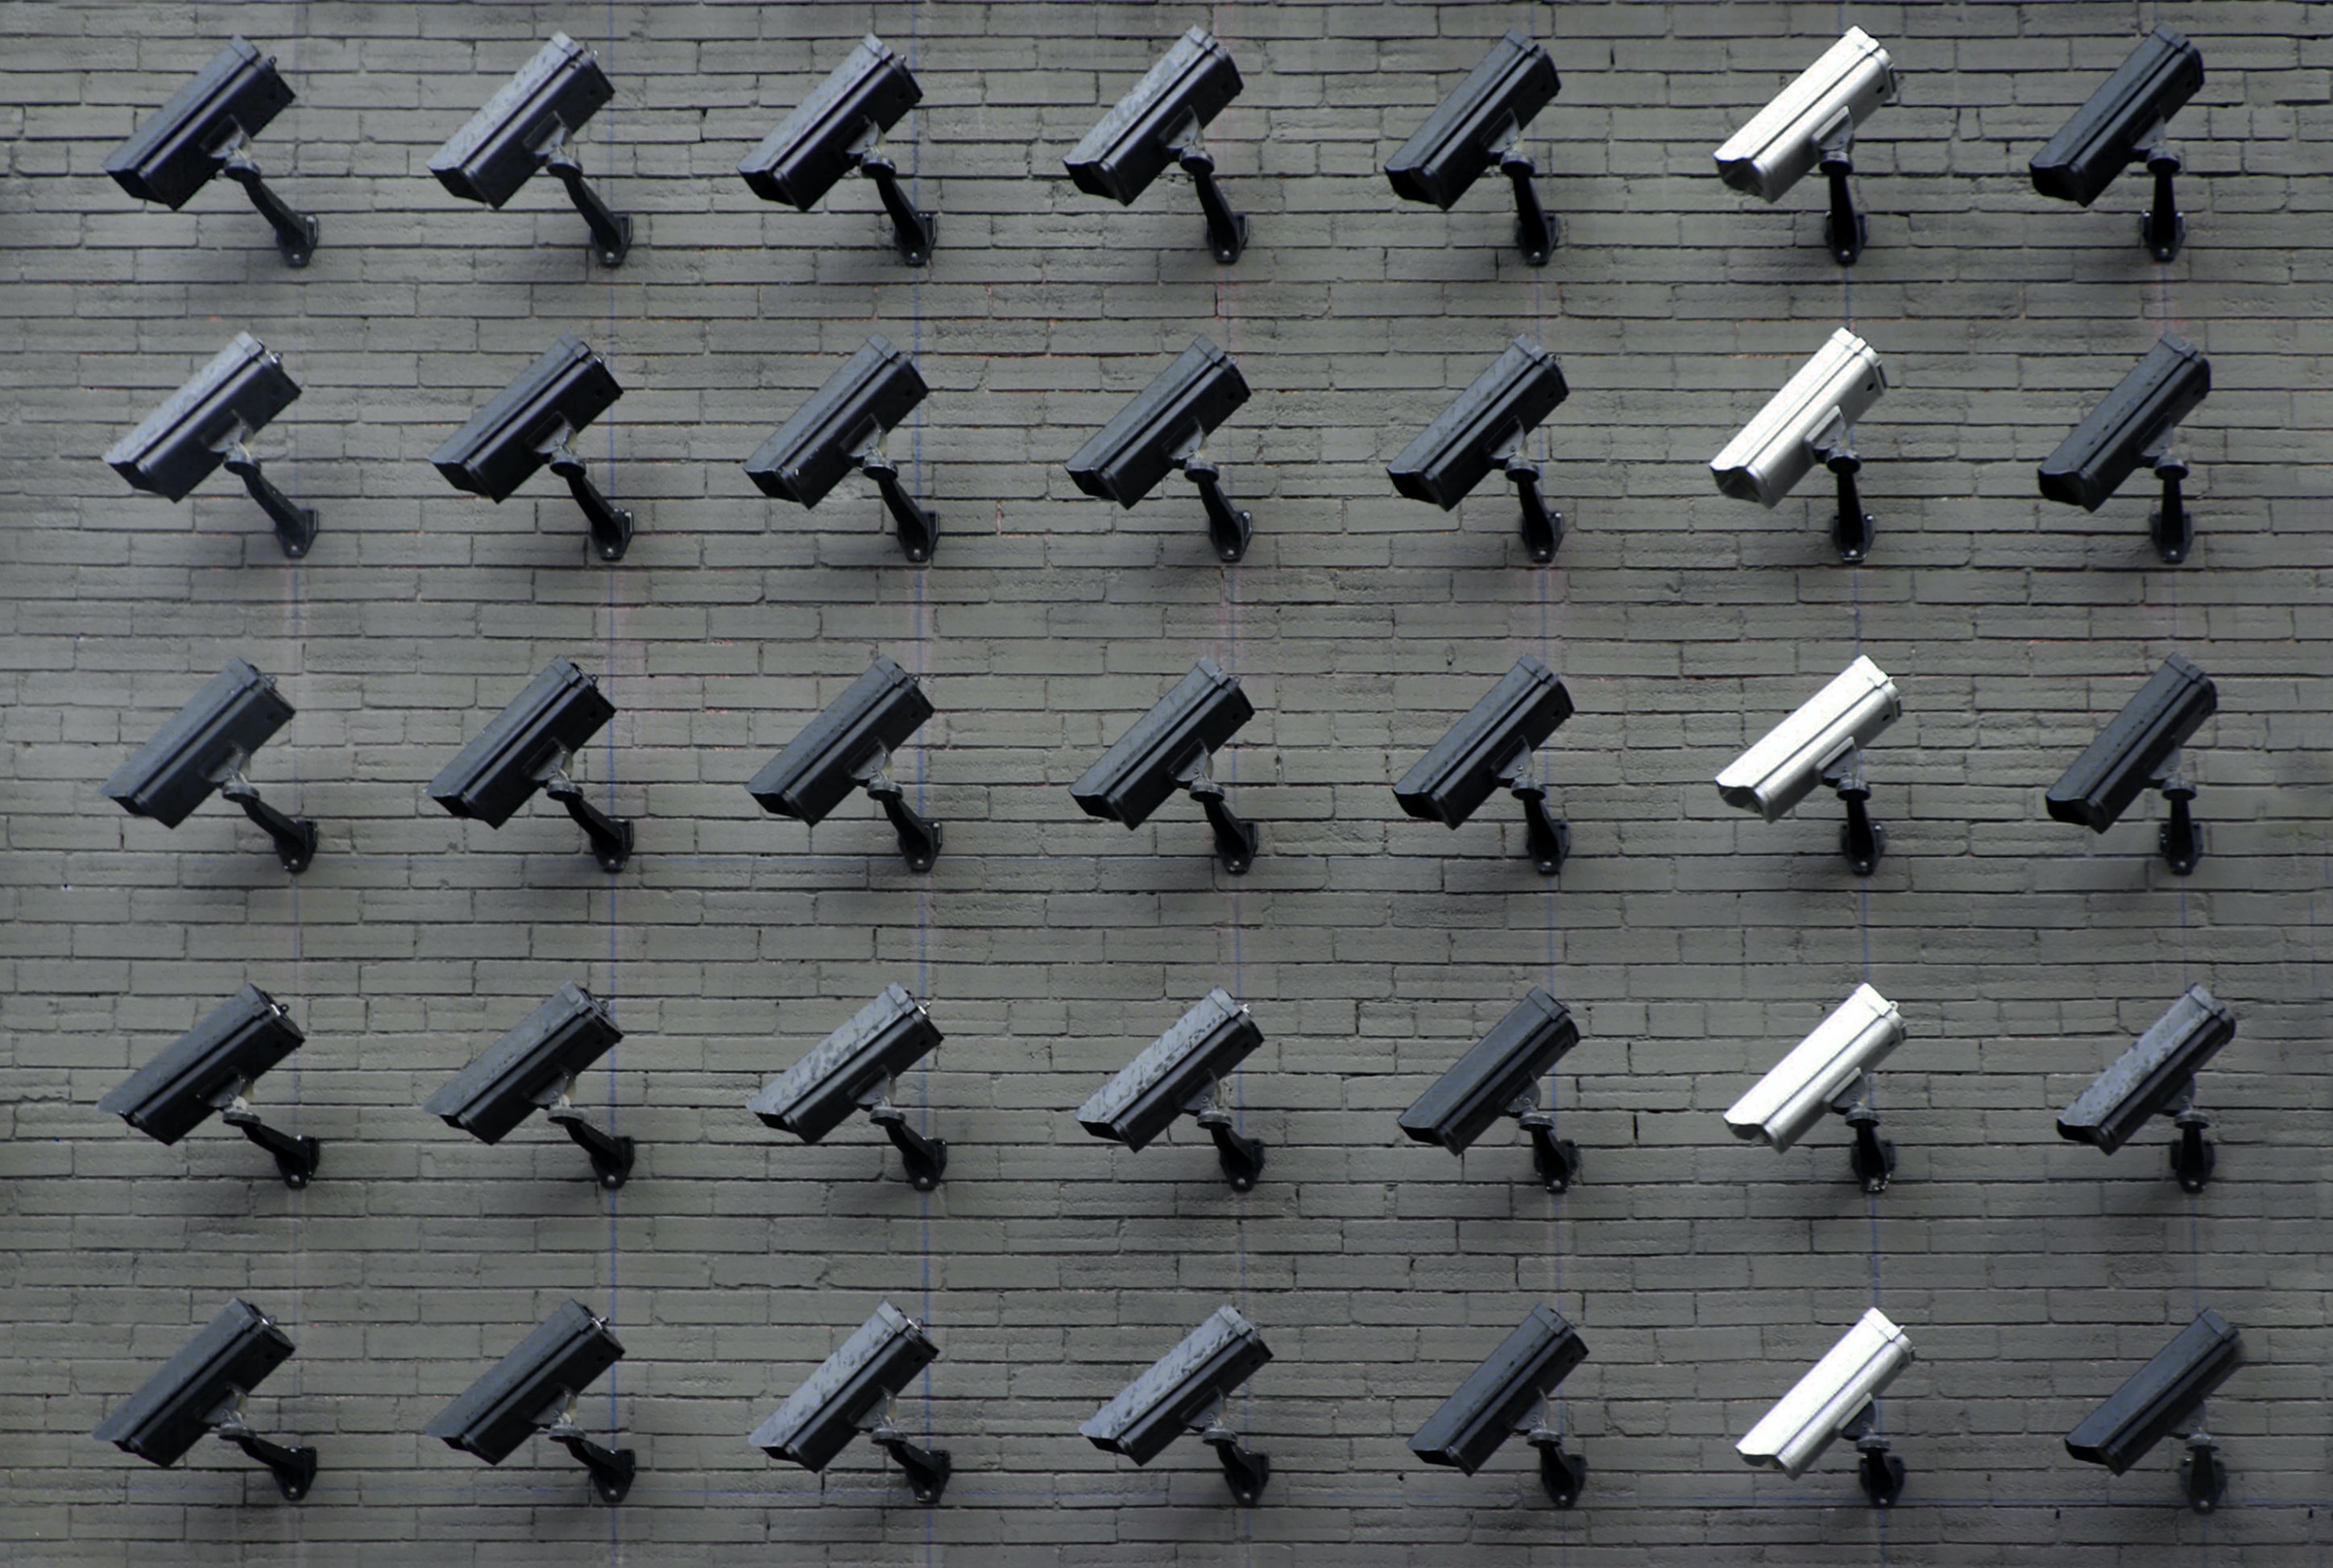 Varying security cameras lined up. A growing number of privacy concerns are being raised about automated tracking and data sharing and storing, locally and nationwide. Photo by Lianhao Qu via Unsplash.